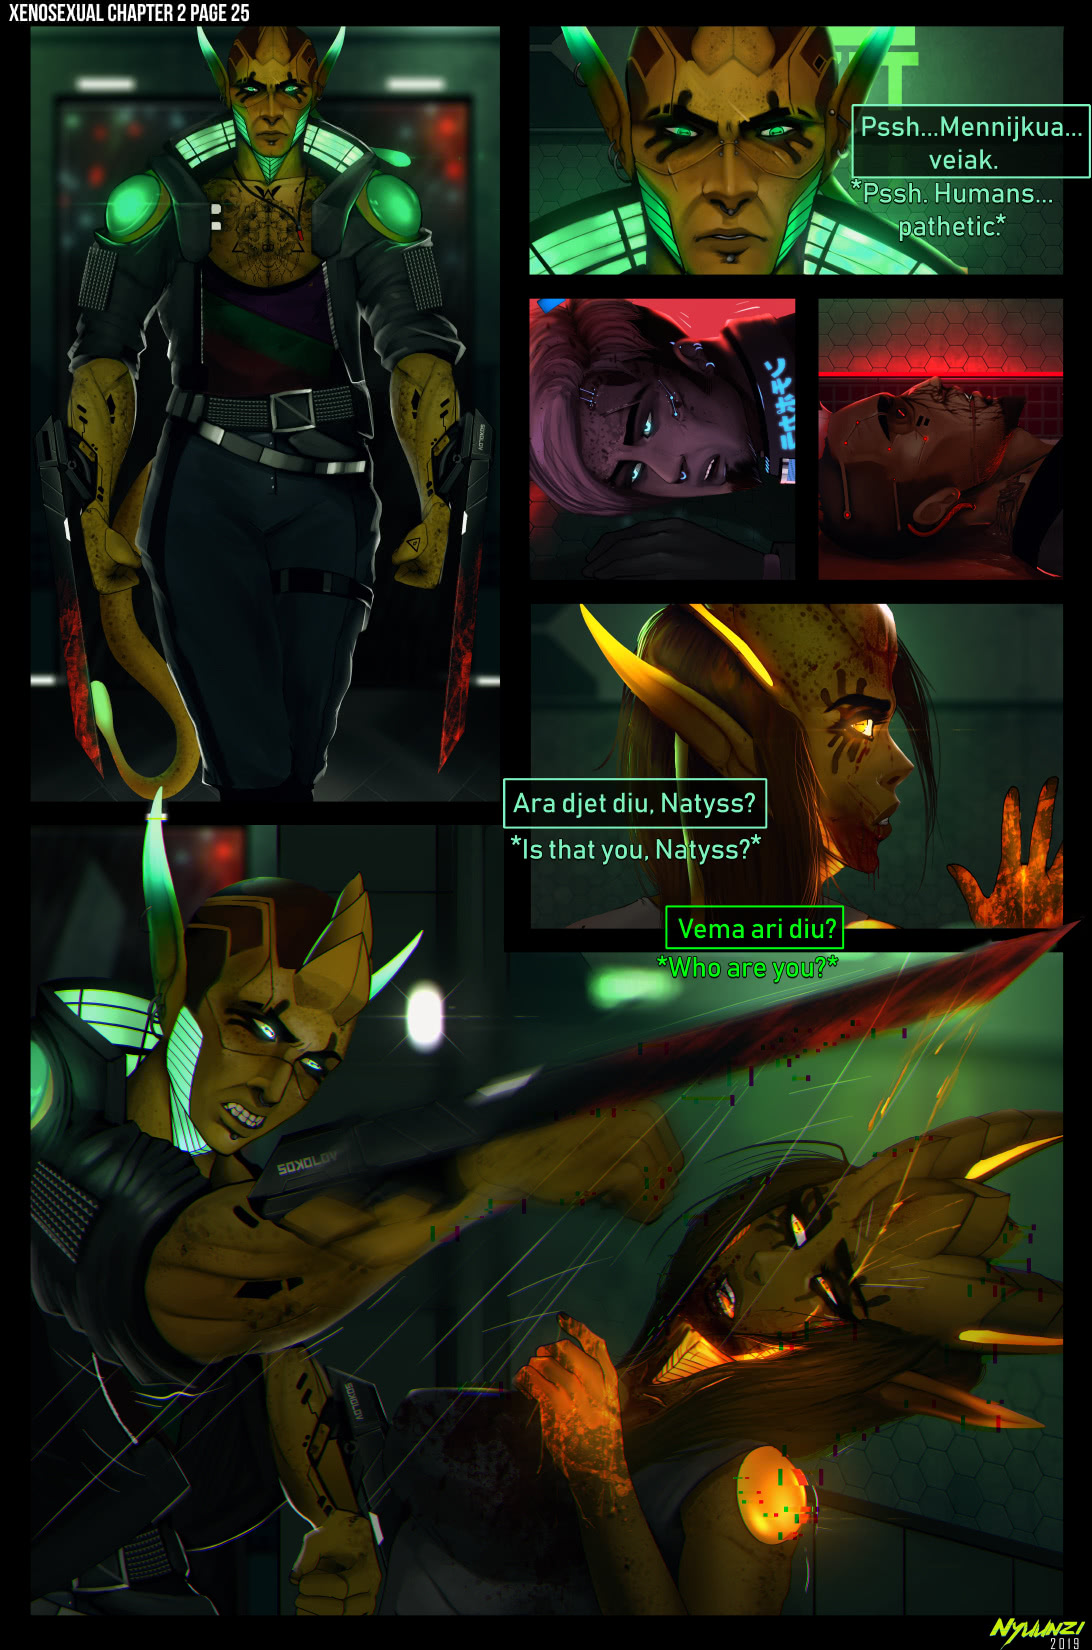 Xenosexual - Page 39